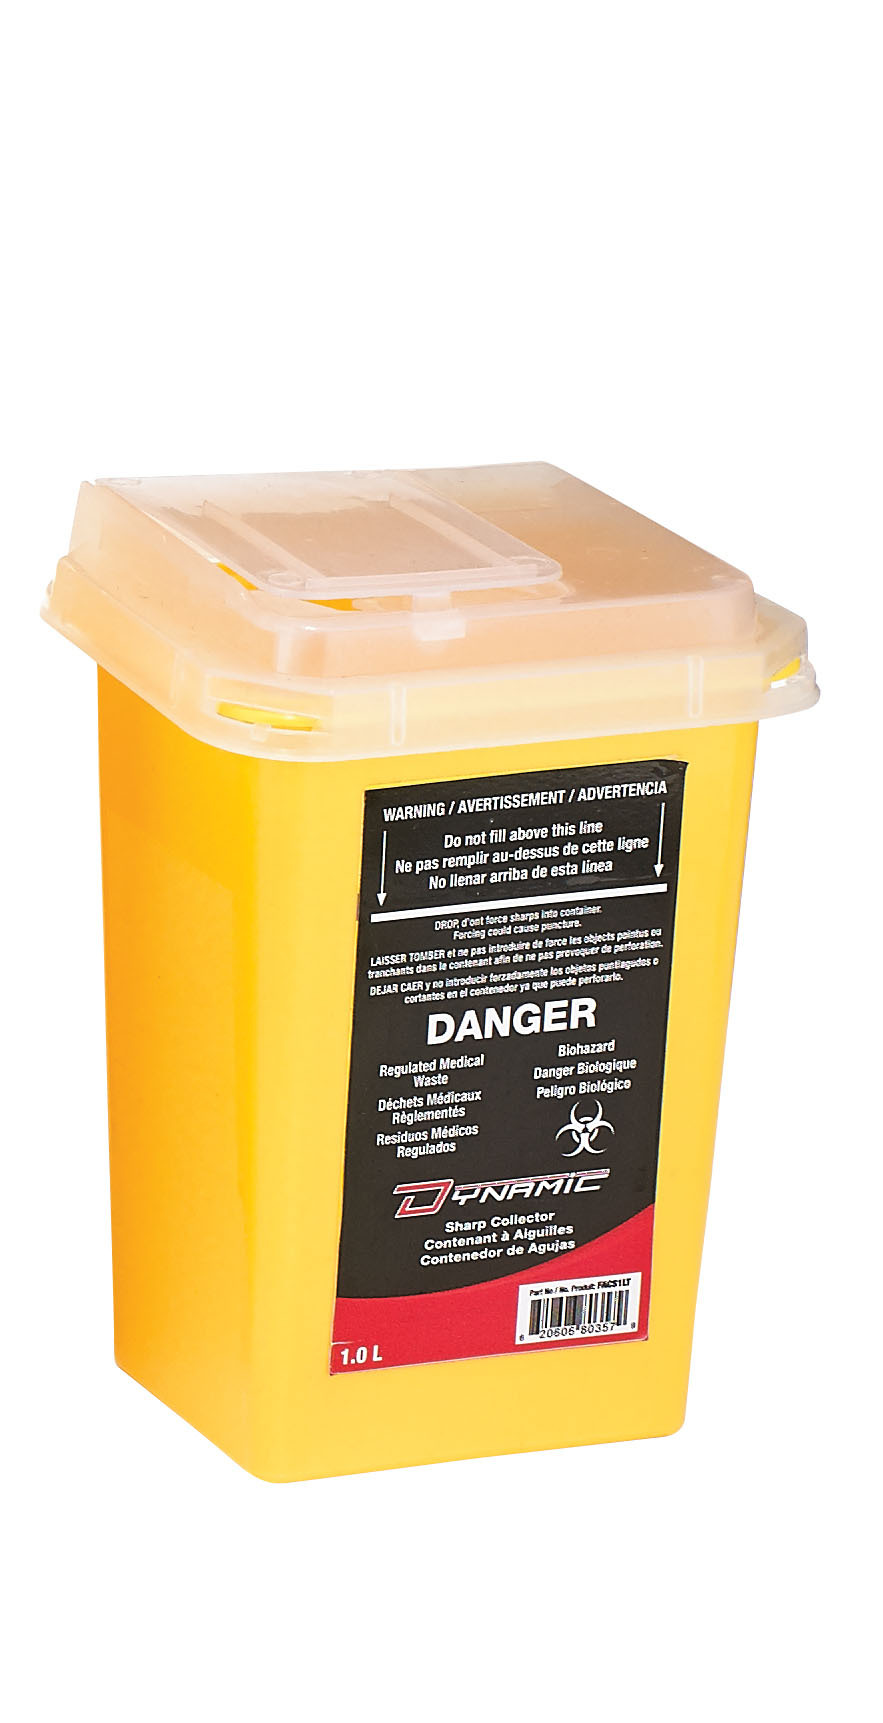 SHARPS CONTAINER, 1L